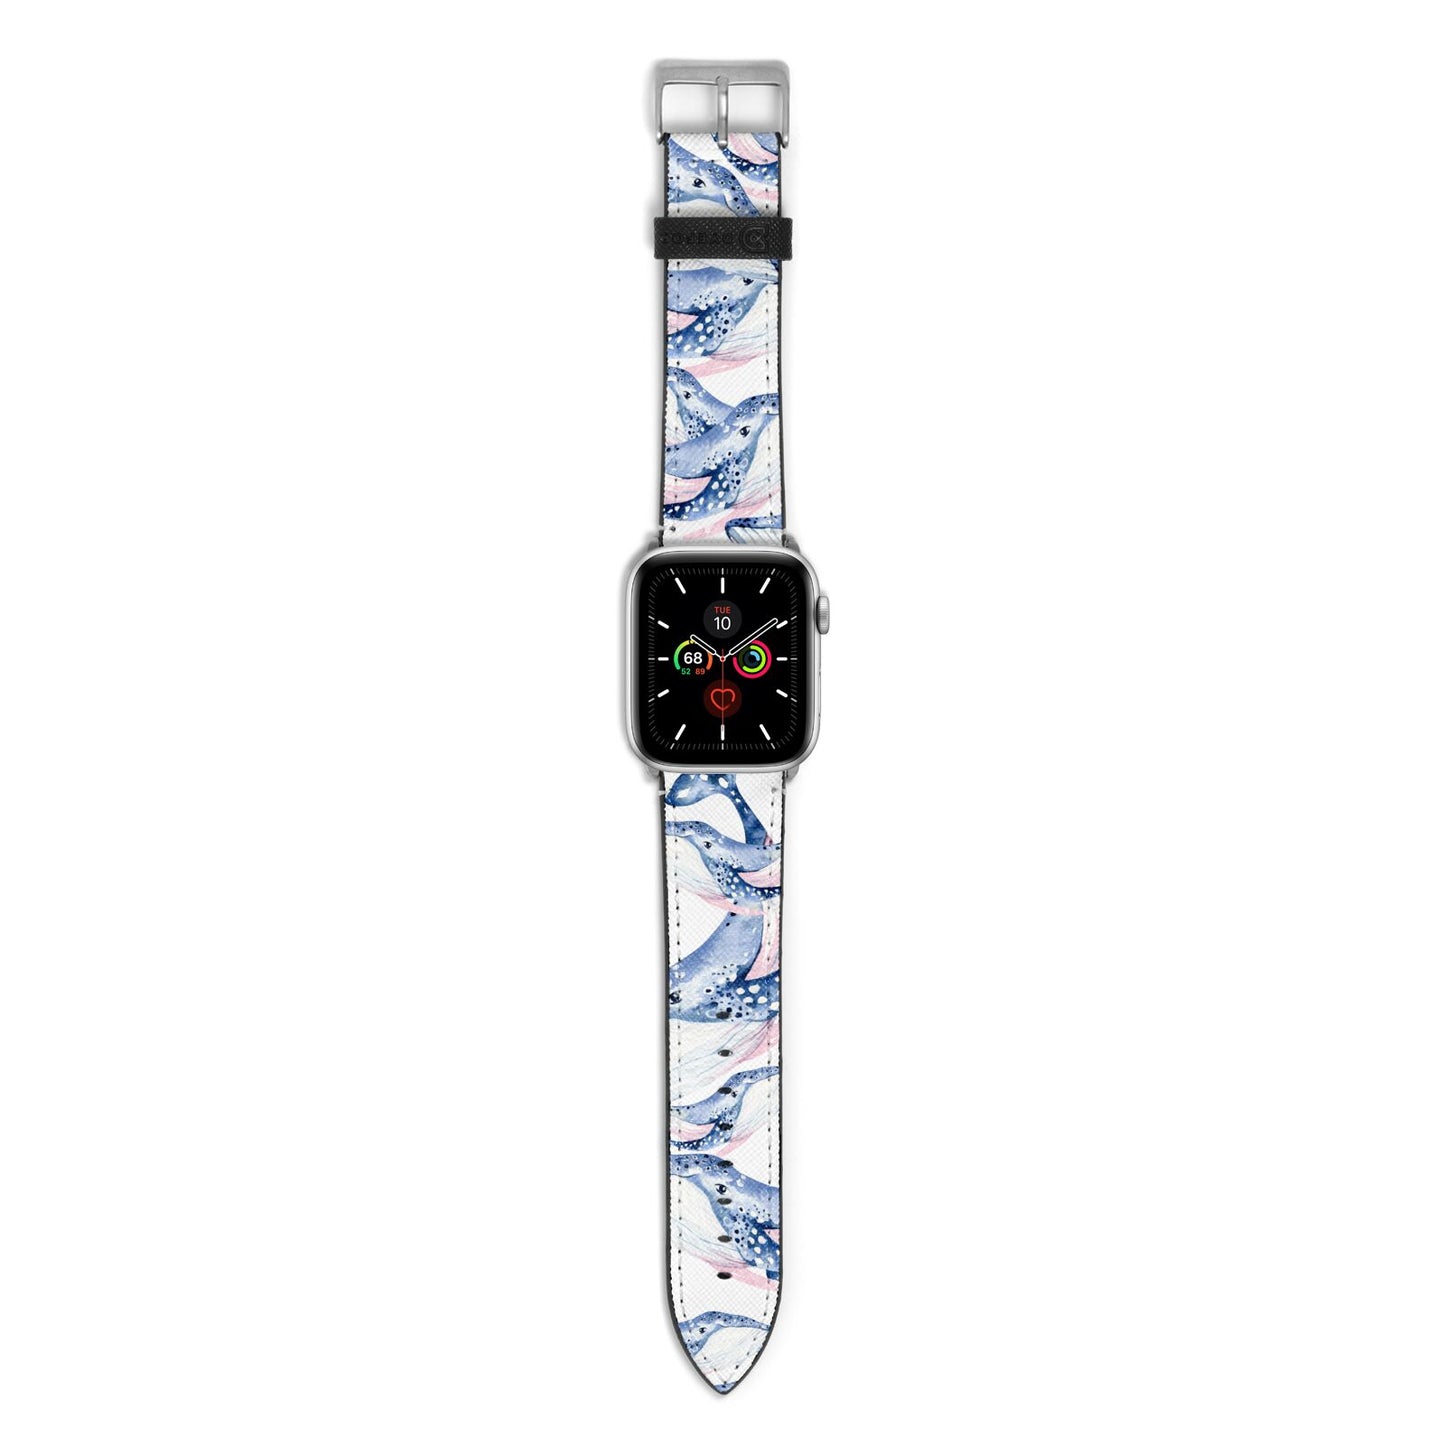 Whale Apple Watch Strap with Silver Hardware